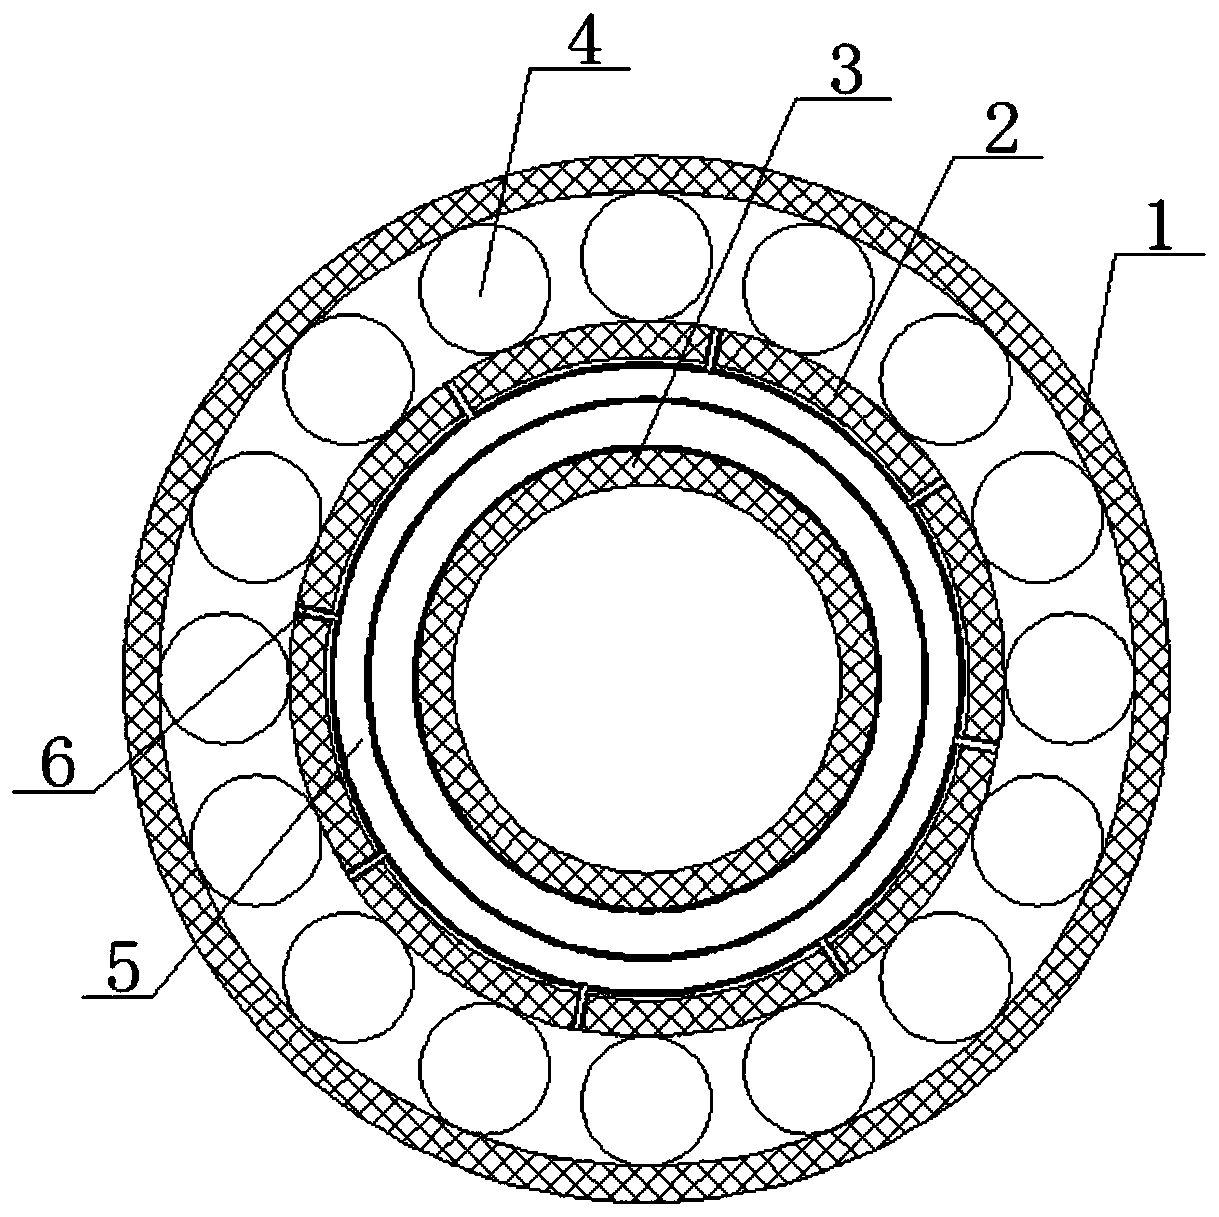 Heavy-load high-temperature self-lubricating rolling bearing and processing technology